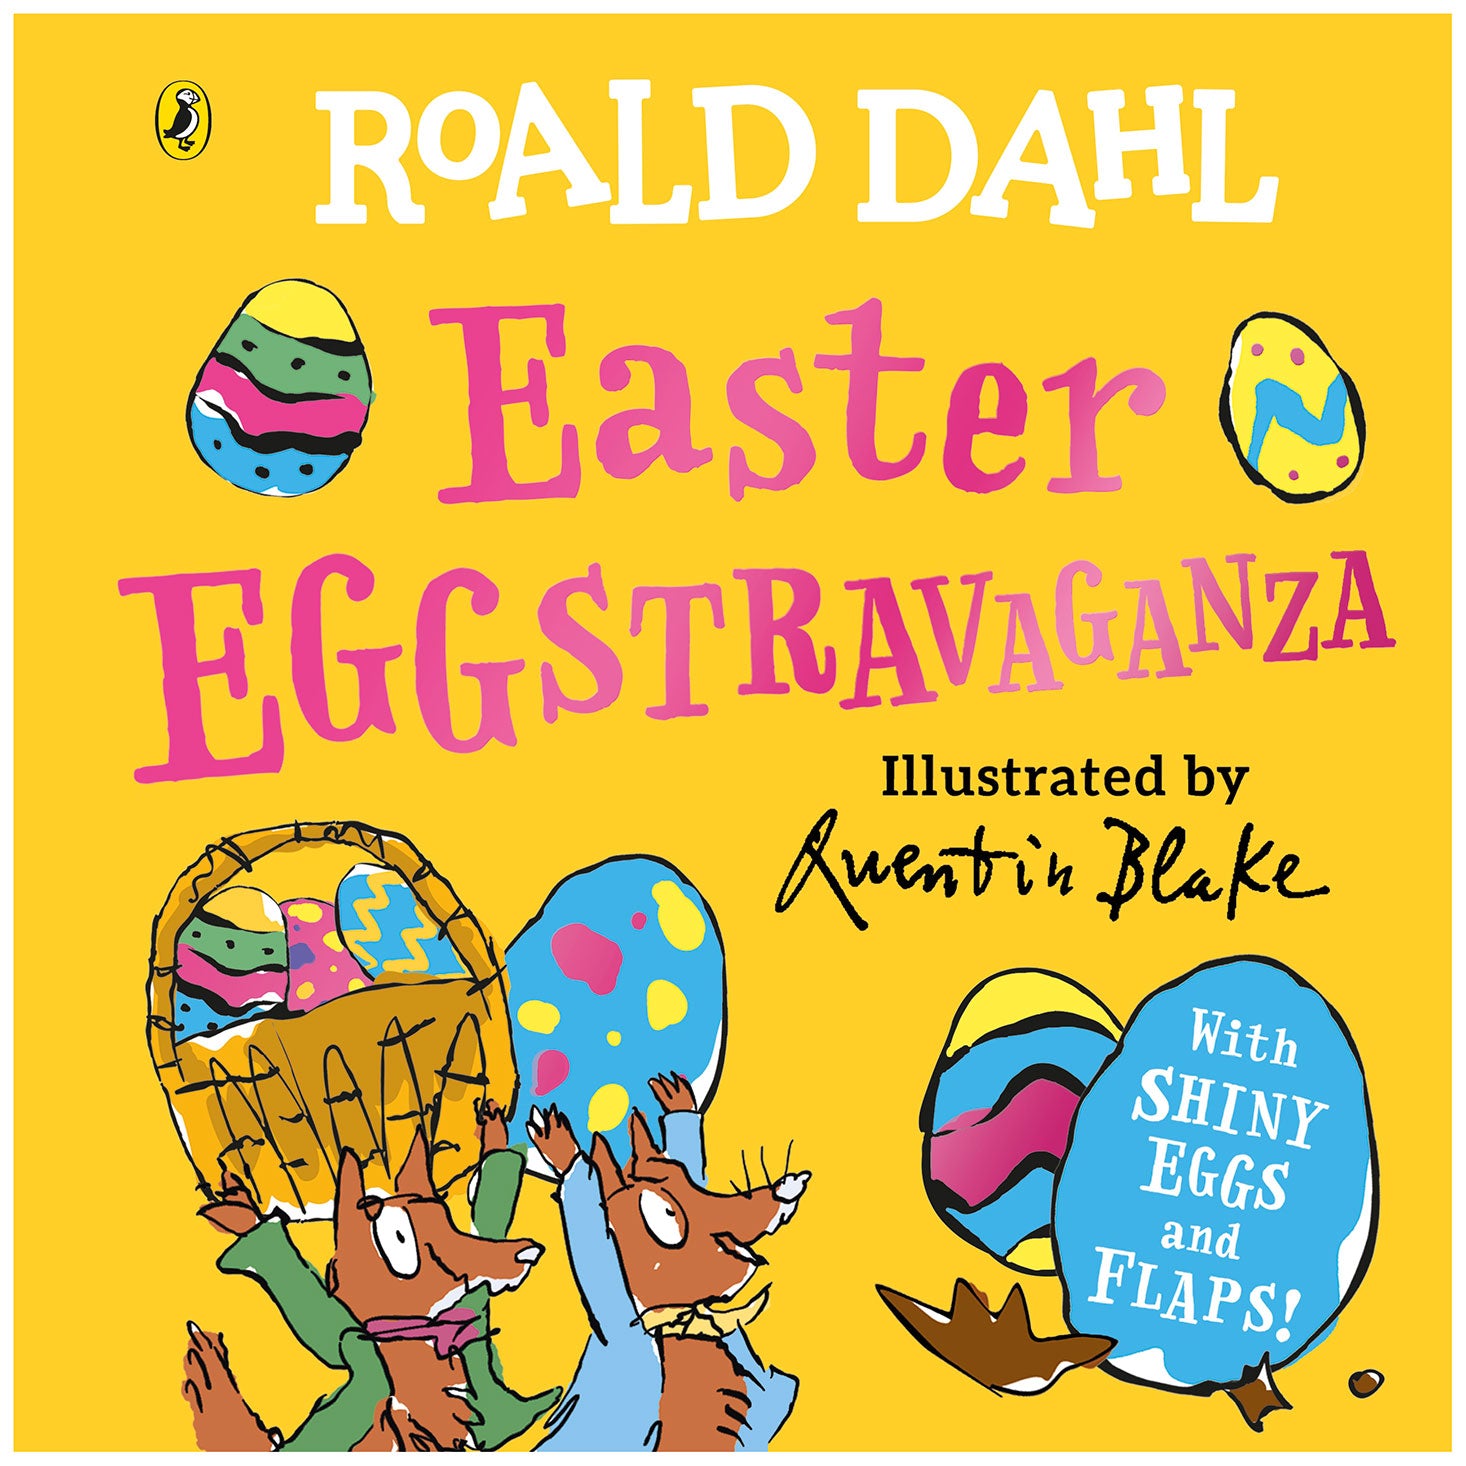 Easter Eggstravaganza board book, based on Roald Dahl's stories with illustrations by Quentin Blake